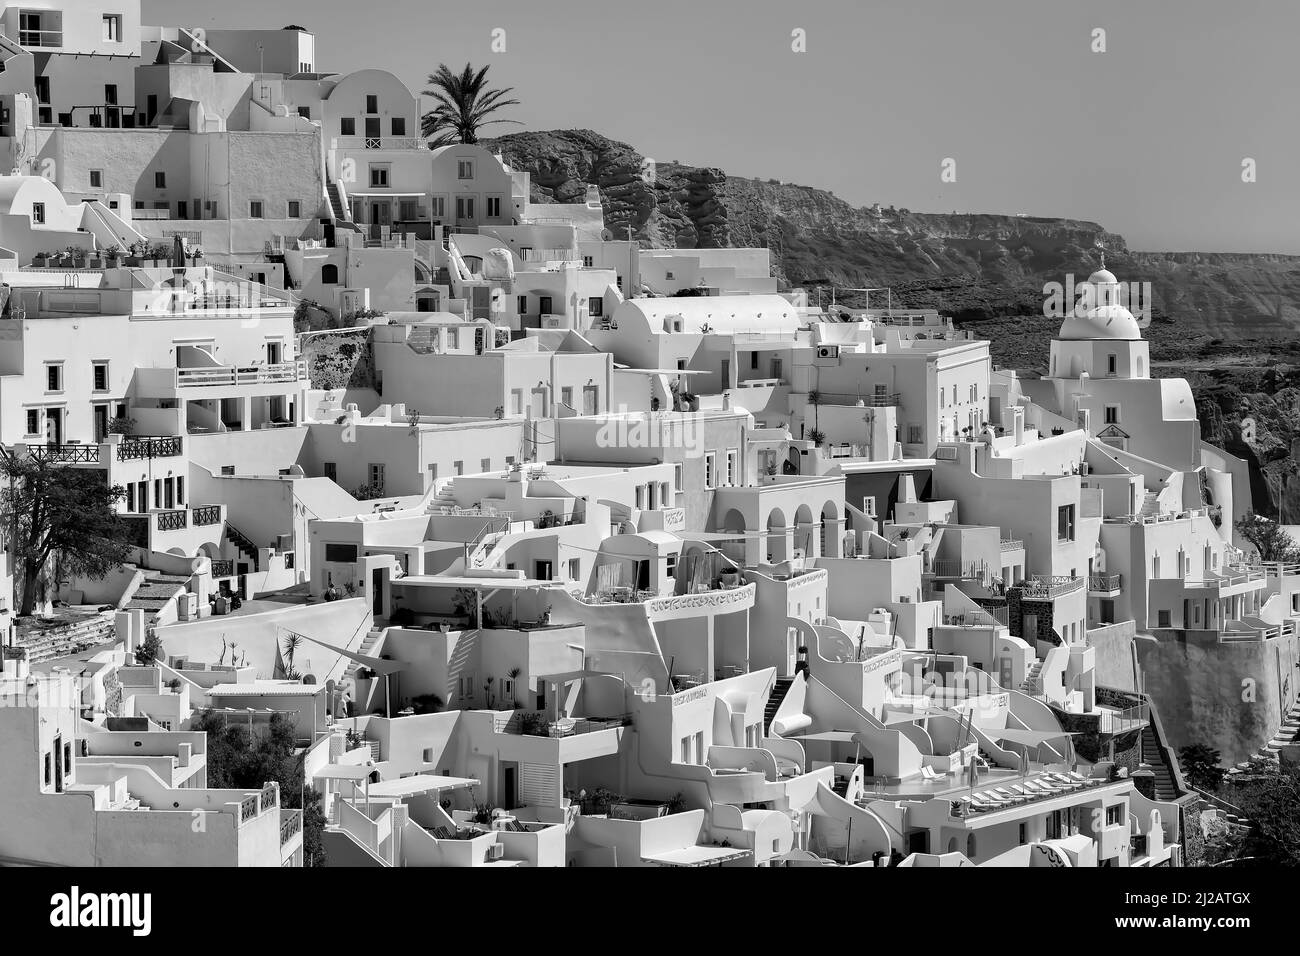 Panoramic view of the picturesque village of Fira Santorini with its hotels, restaurants and villas in black and white Stock Photo